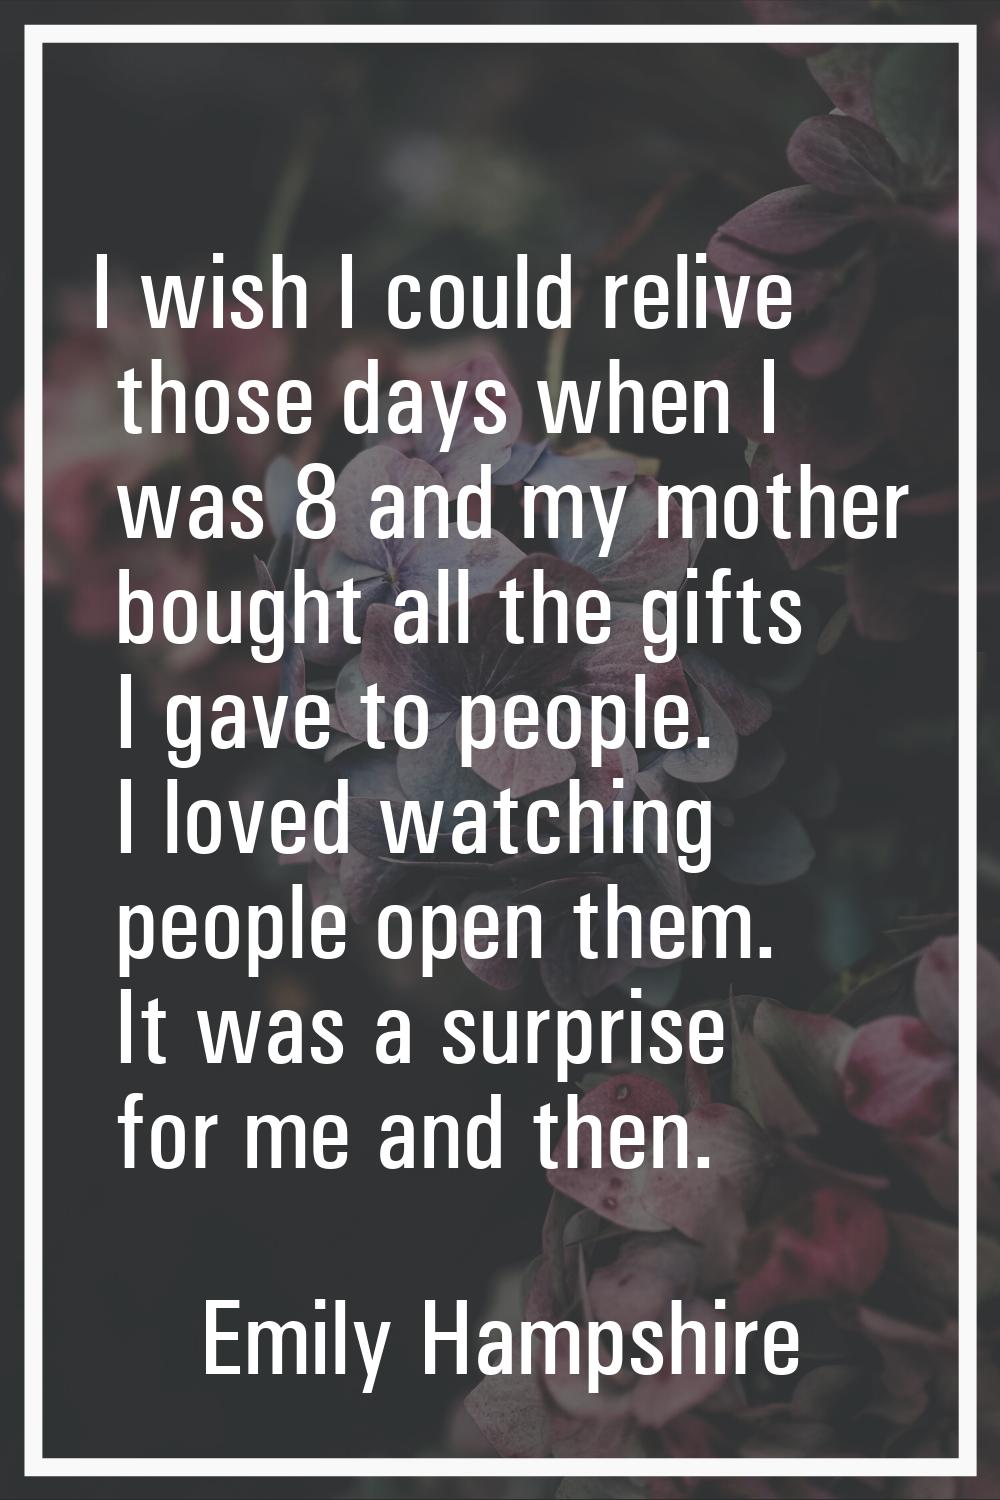 I wish I could relive those days when I was 8 and my mother bought all the gifts I gave to people. 